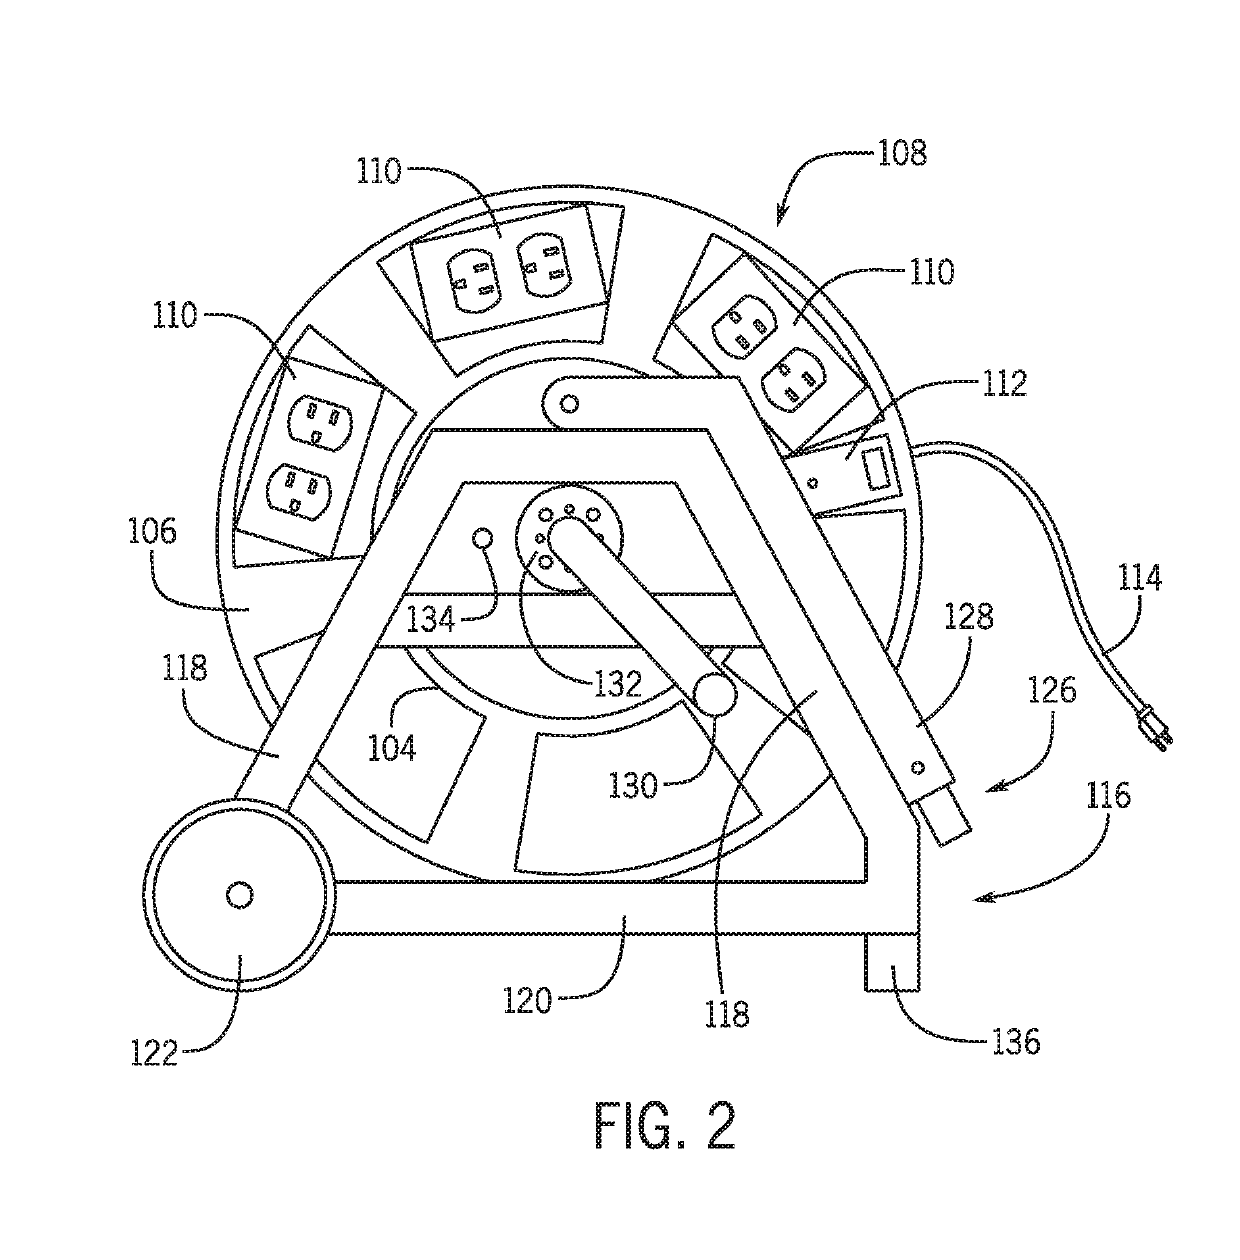 Cart for storing, transporting, and organizing a long electrical cord and a plurality of electrical outlets